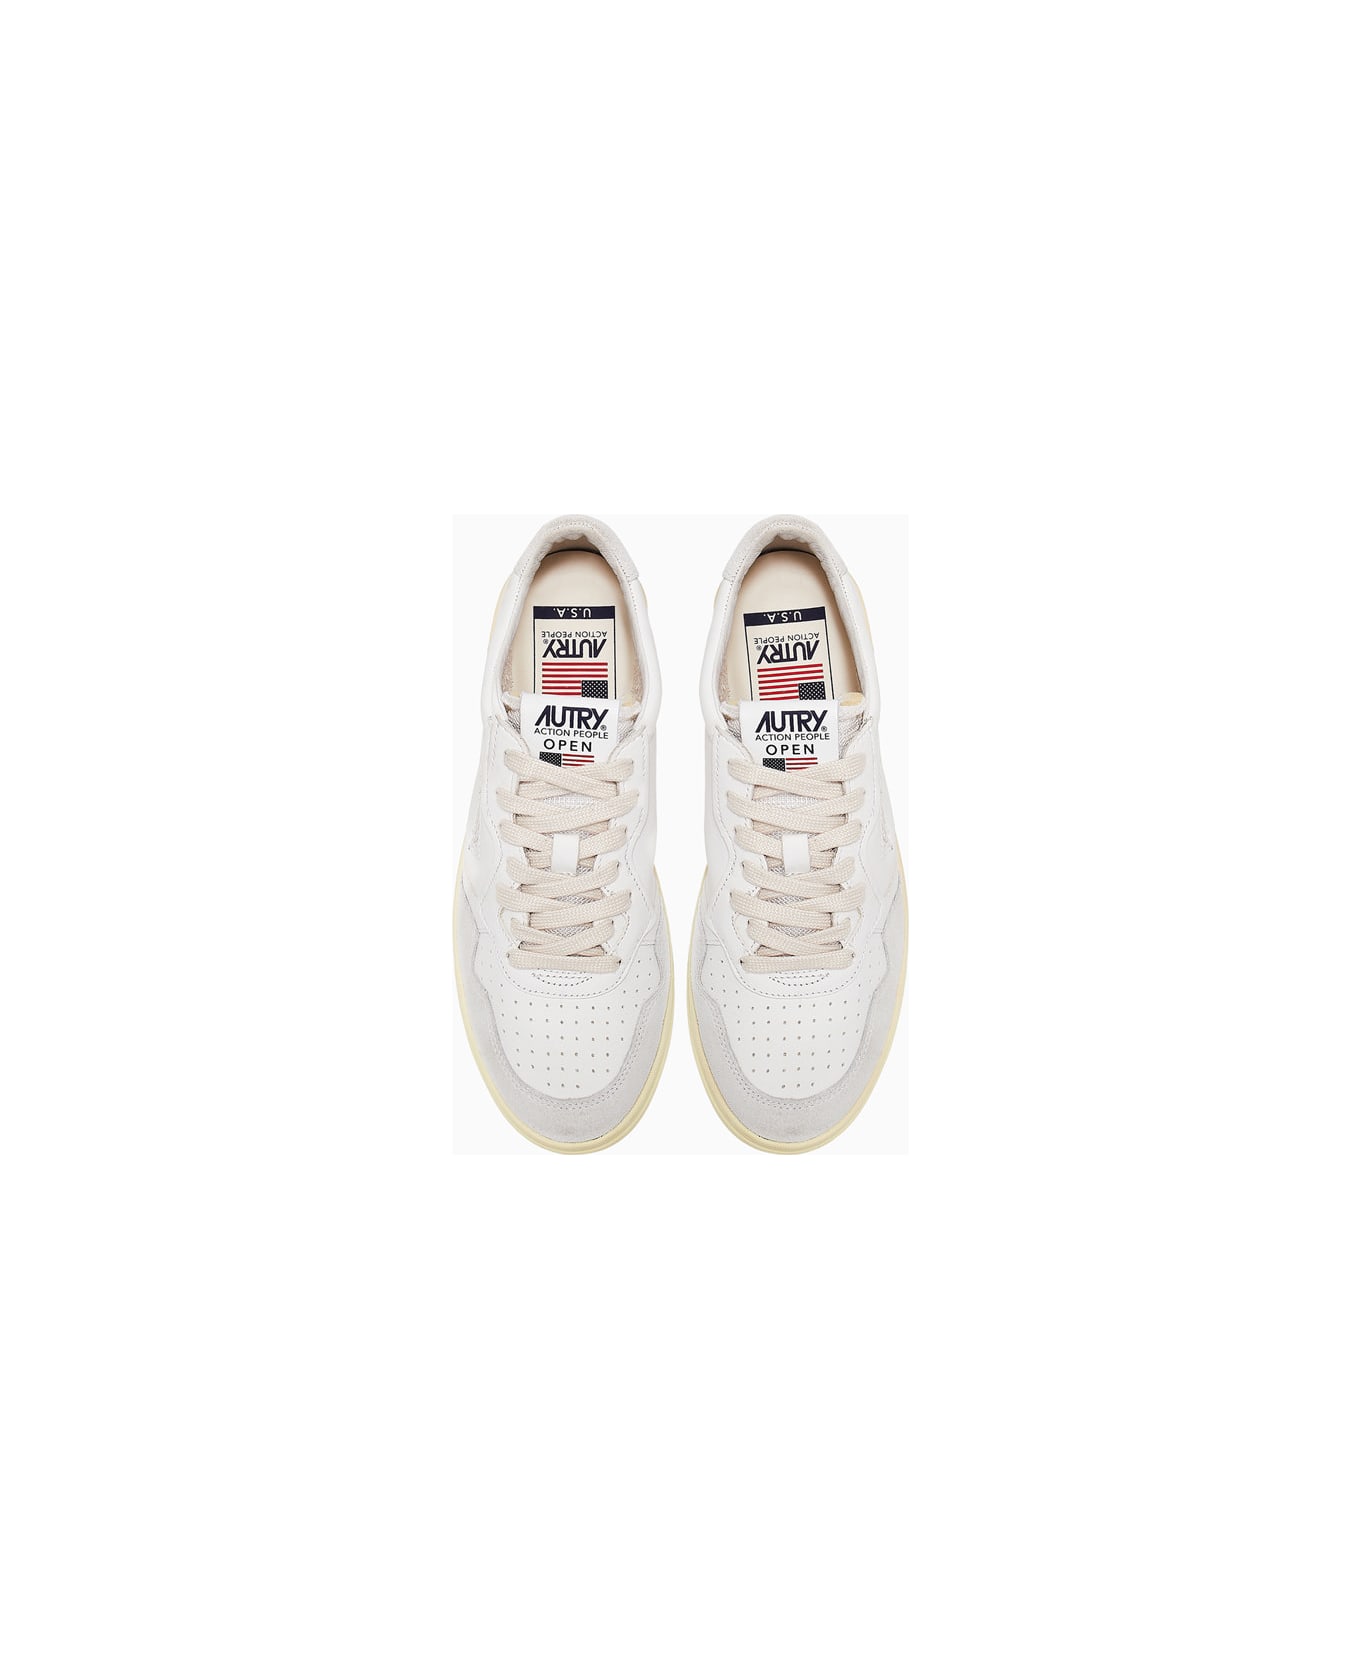 Autry Open Low Sneakers - White